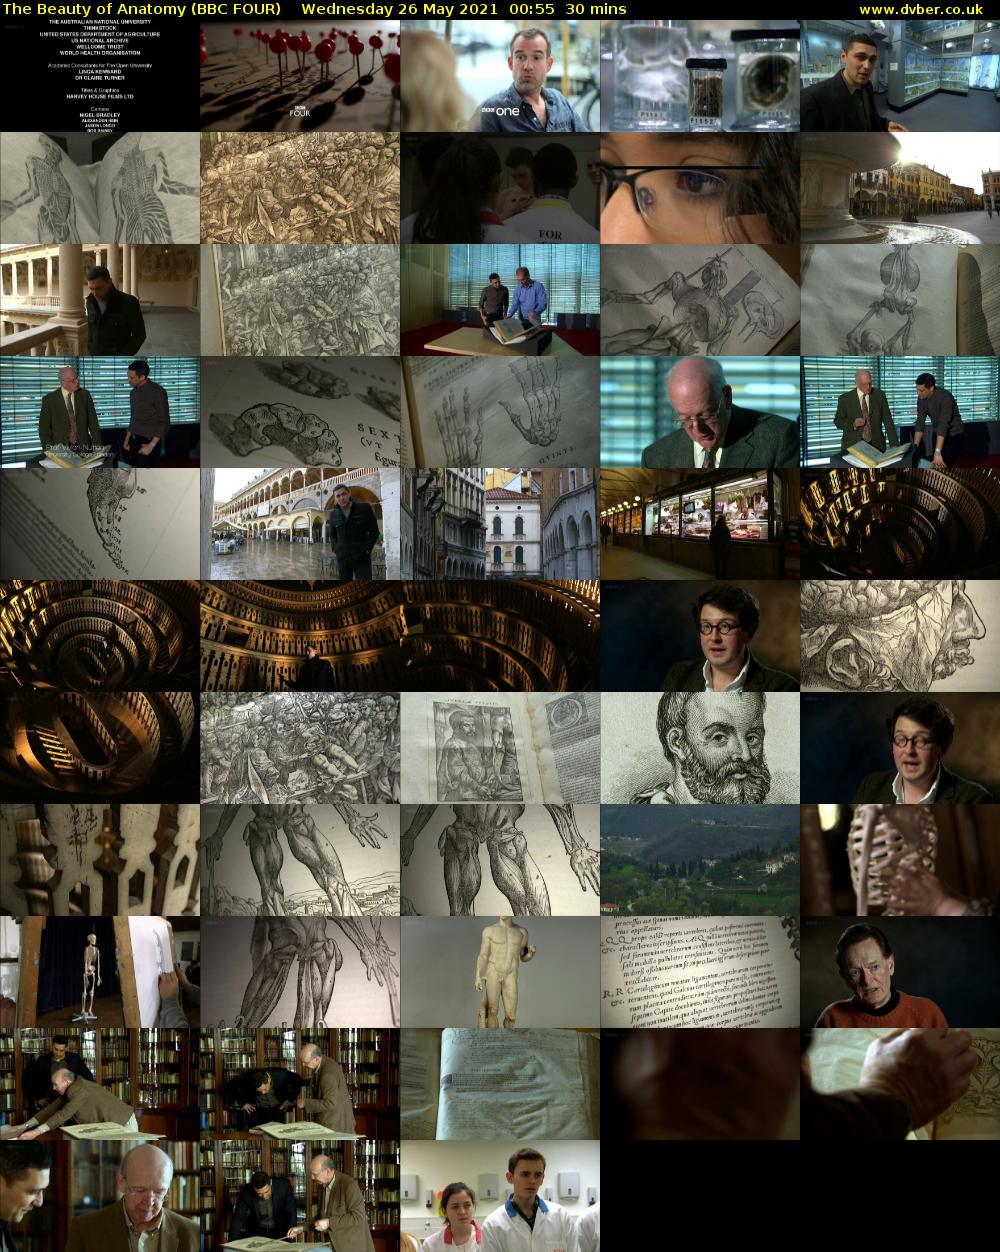 The Beauty of Anatomy (BBC FOUR) Wednesday 26 May 2021 00:55 - 01:25